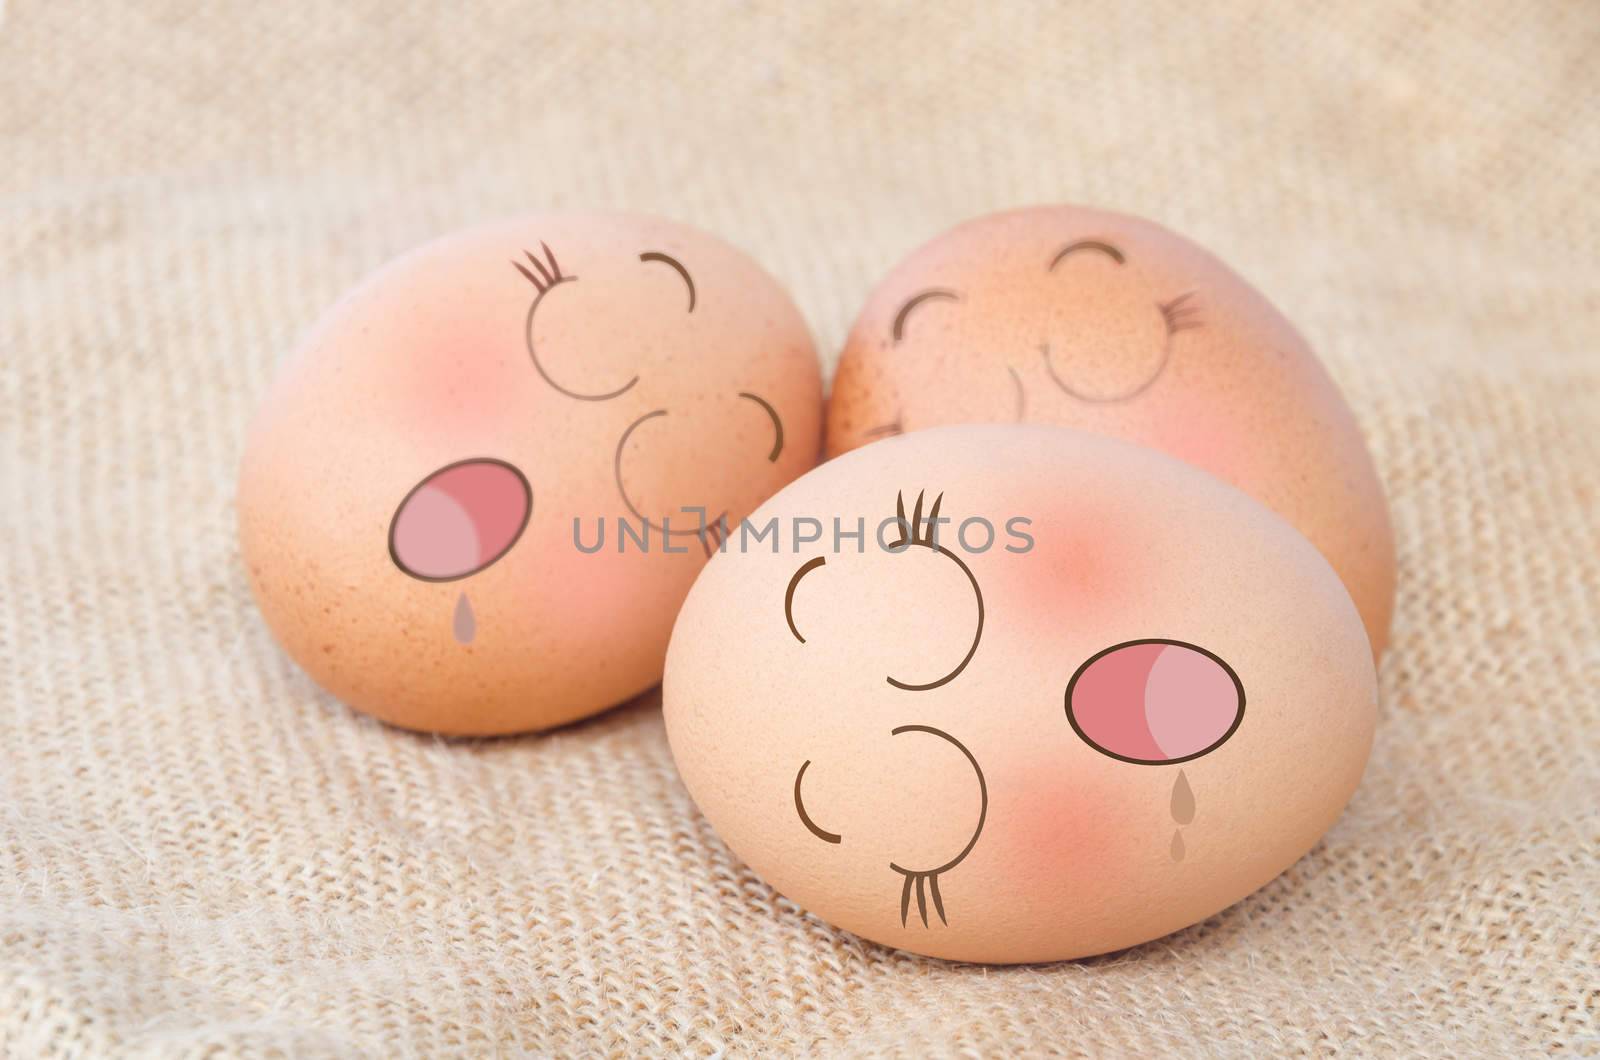 Eggs sleep in Expression Face on sack background.